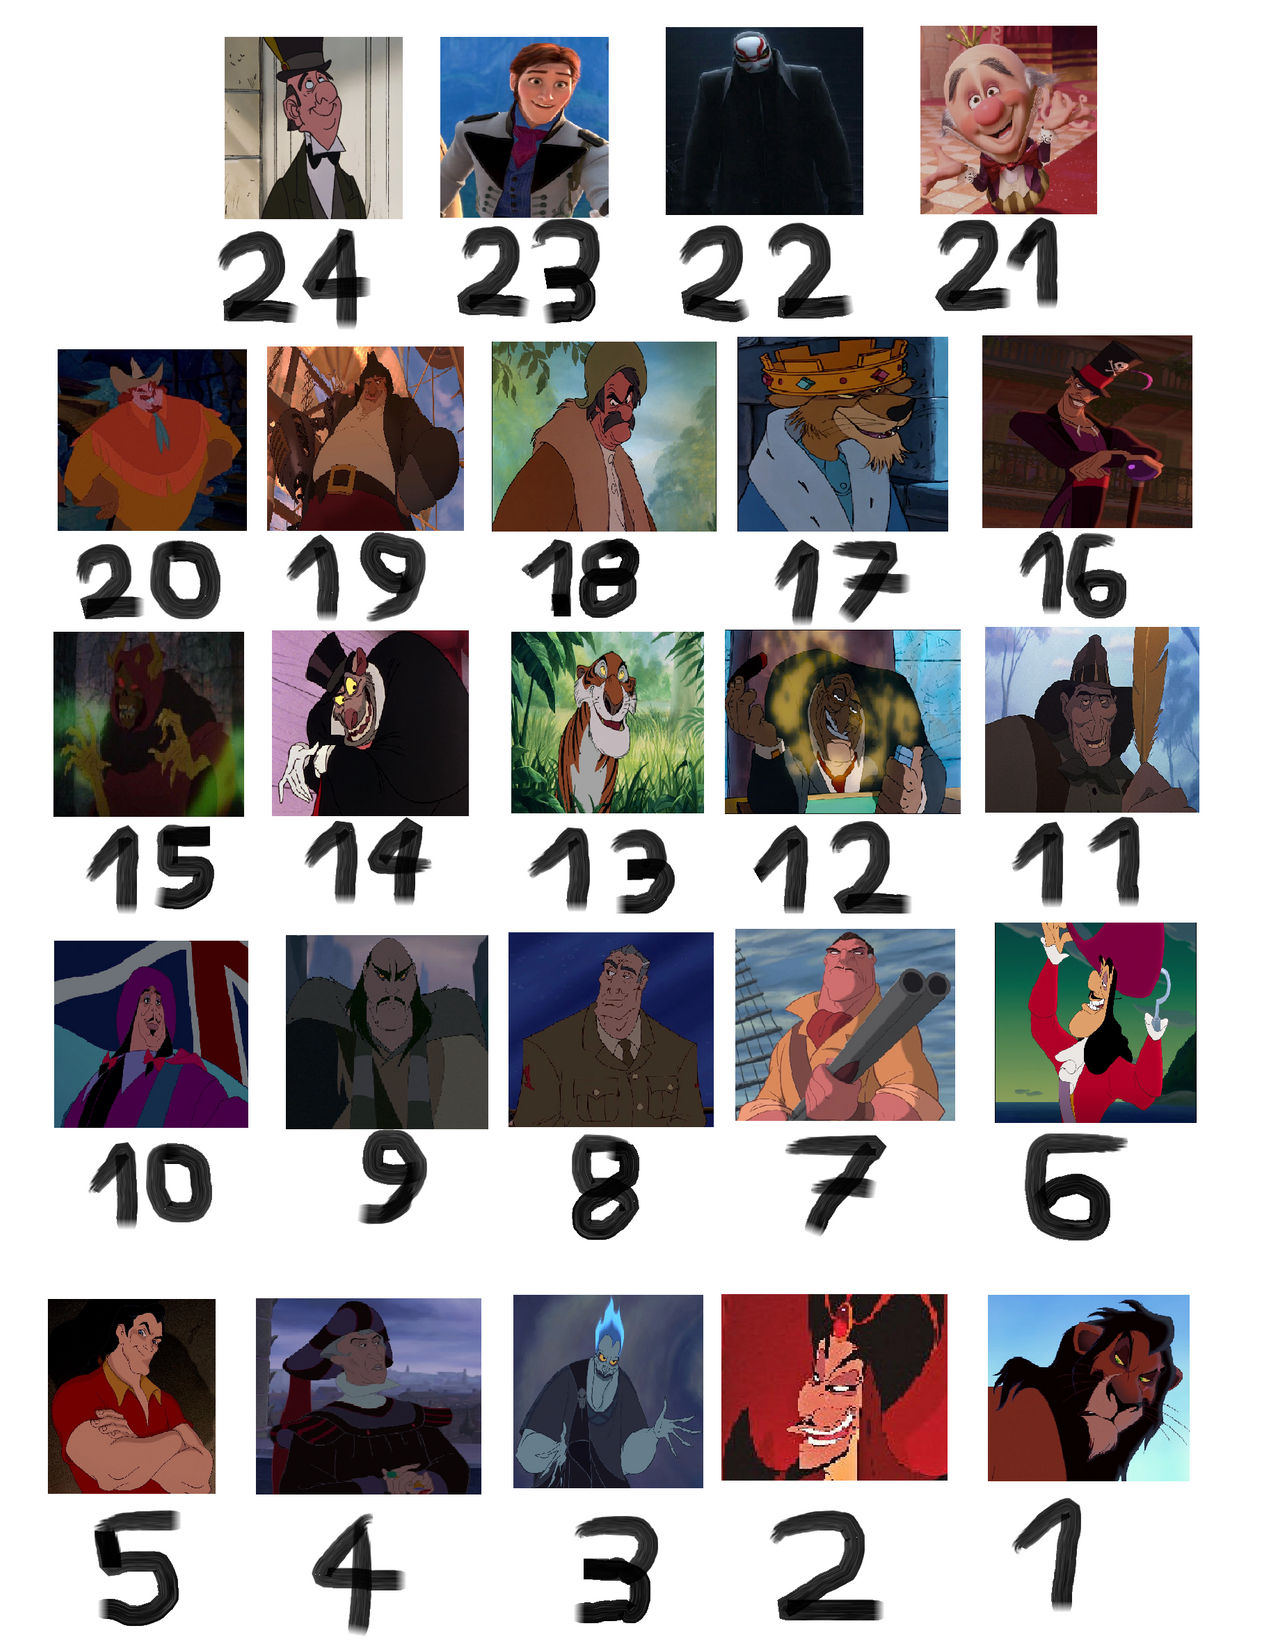 The 30 best Disney villains of all time ranked